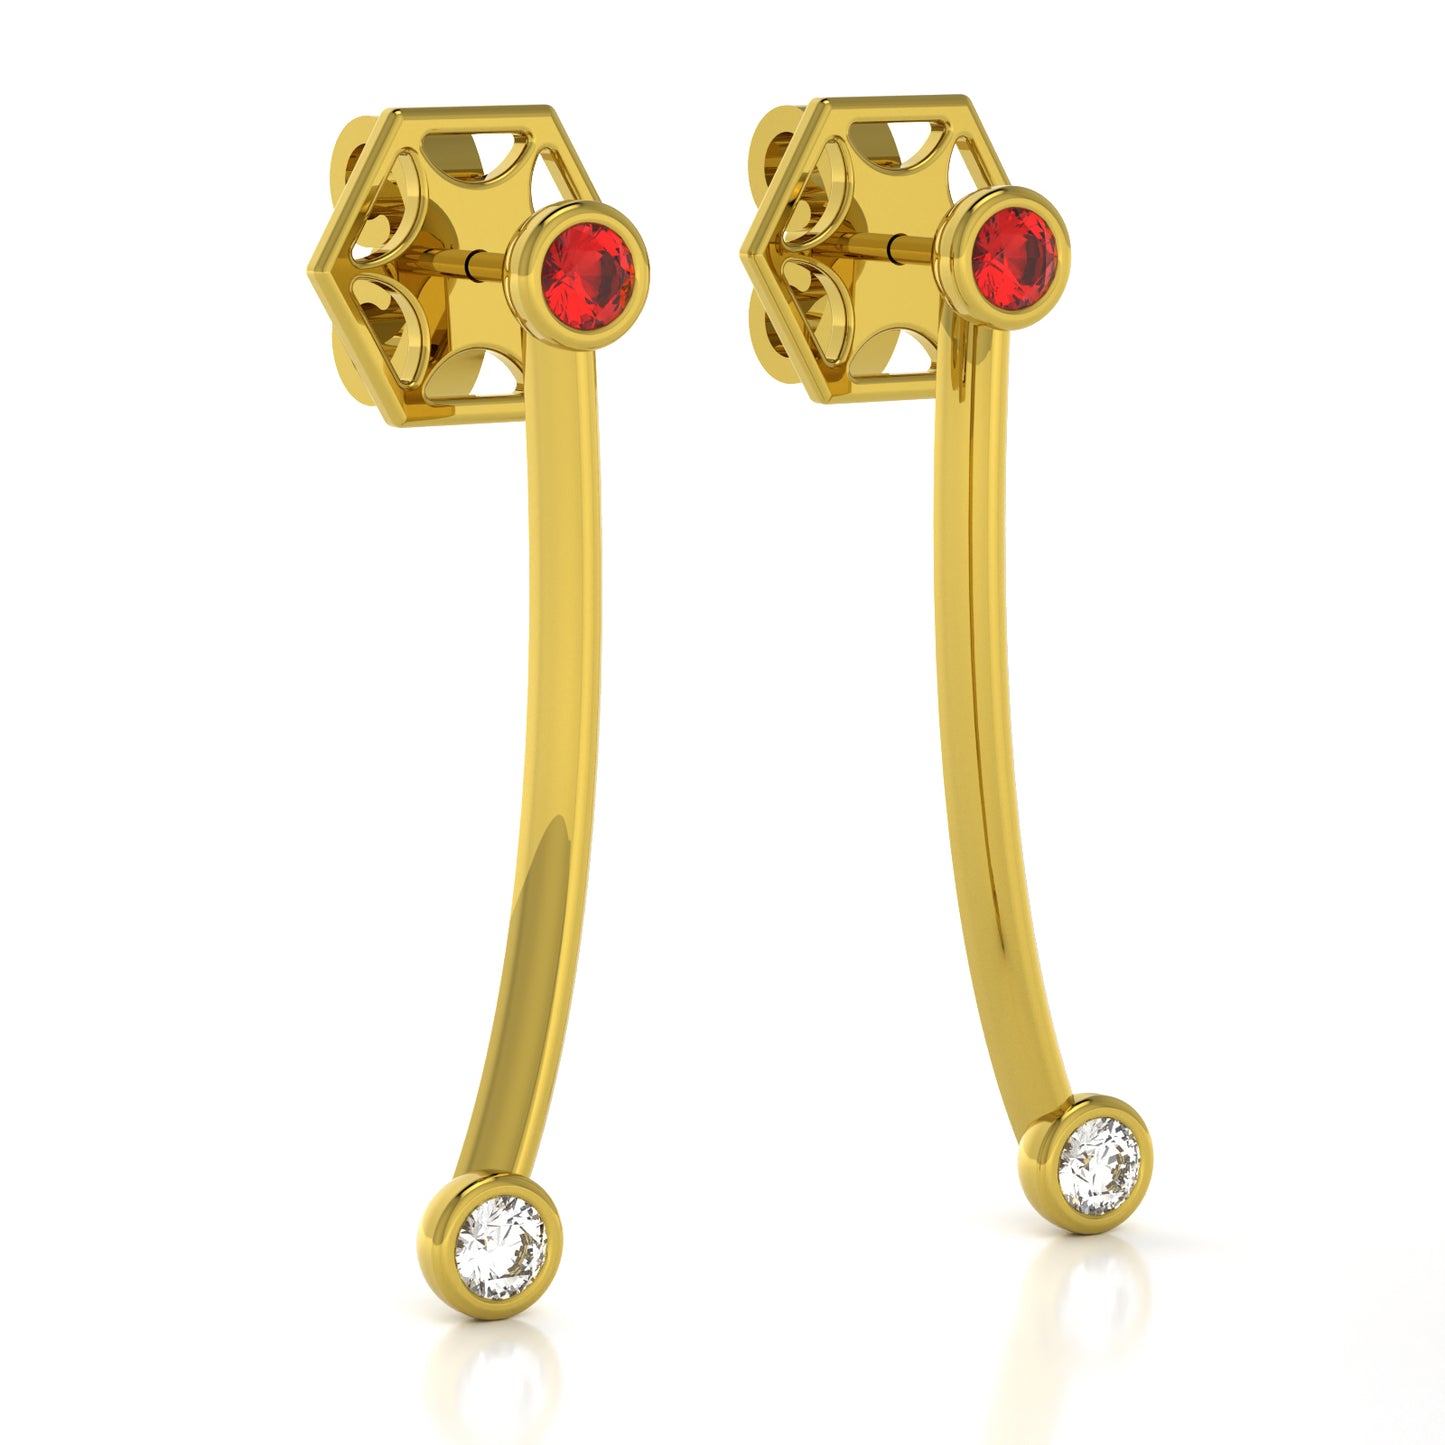 The Mingled Earrings - Double Rounds - 18K / Platinum